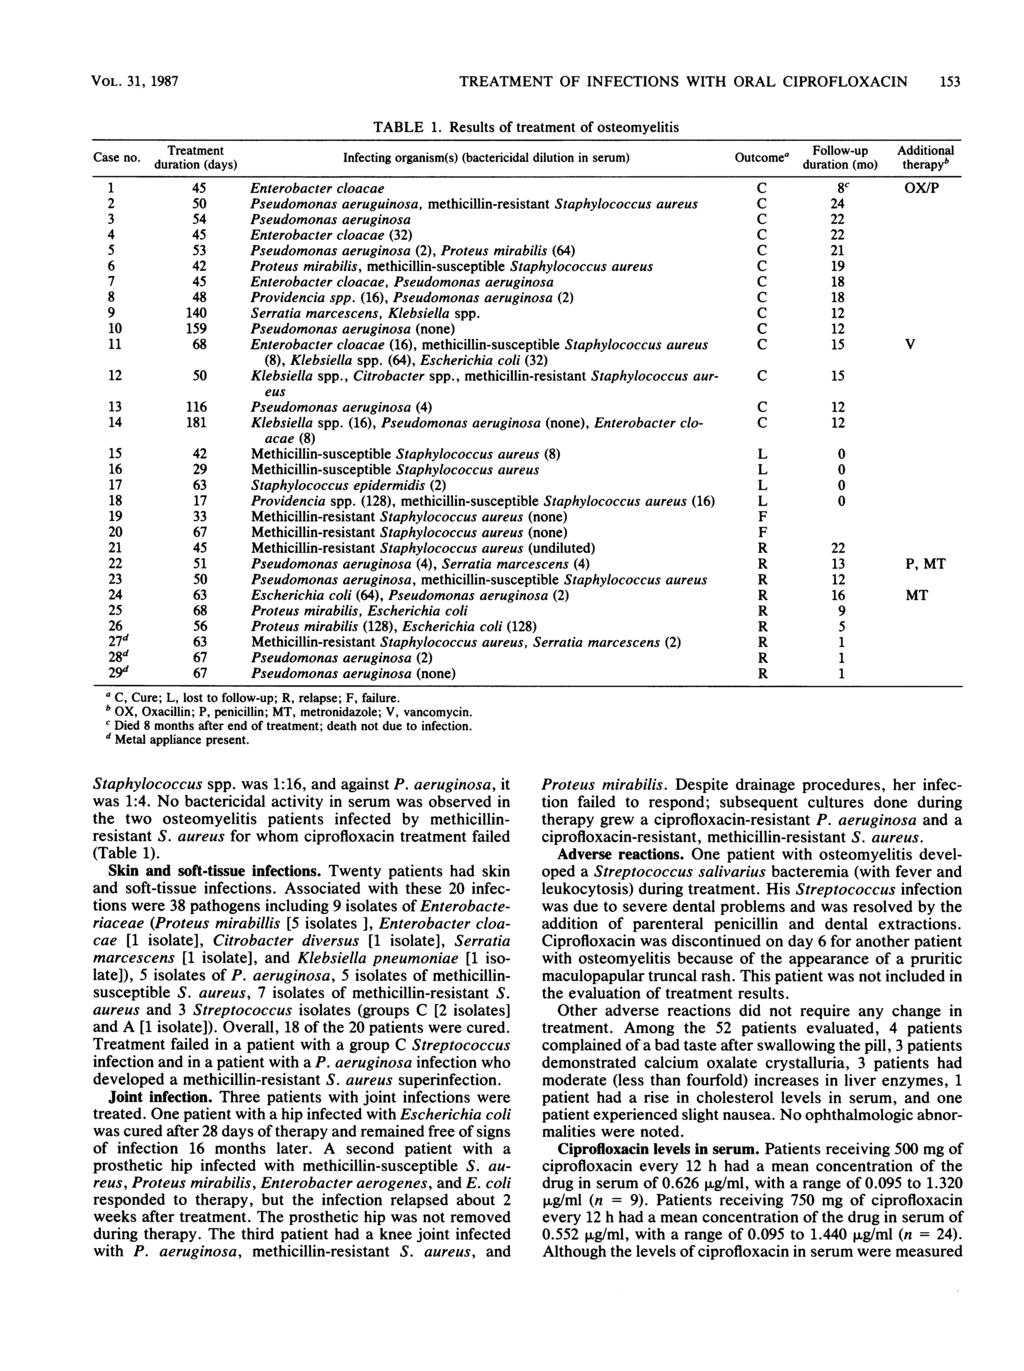 VOL. 31, 1987 TREATMENT OF INFECTIONS WITH ORAL CIPROFLOXACIN 153 TABLE 1. Results of treatment of osteomyelitis Case no.